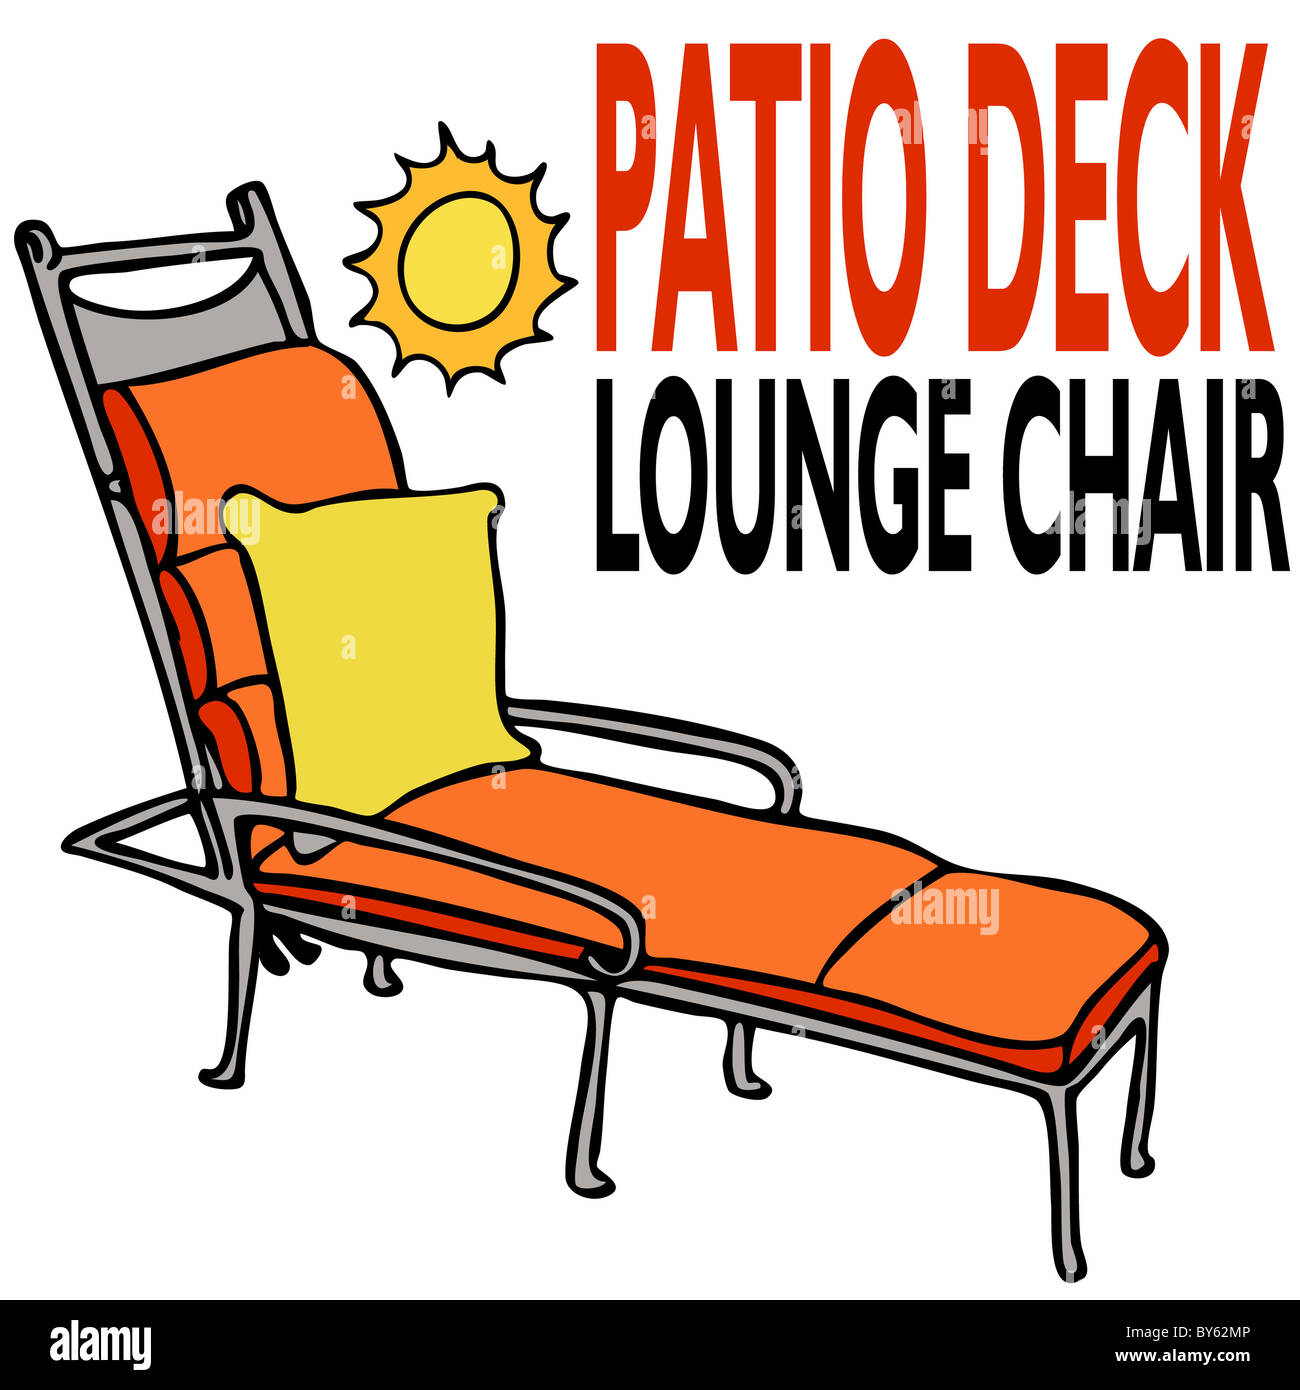 An Image Of A Patio Deck Lounge Chair Stock Photo 33939942 Alamy